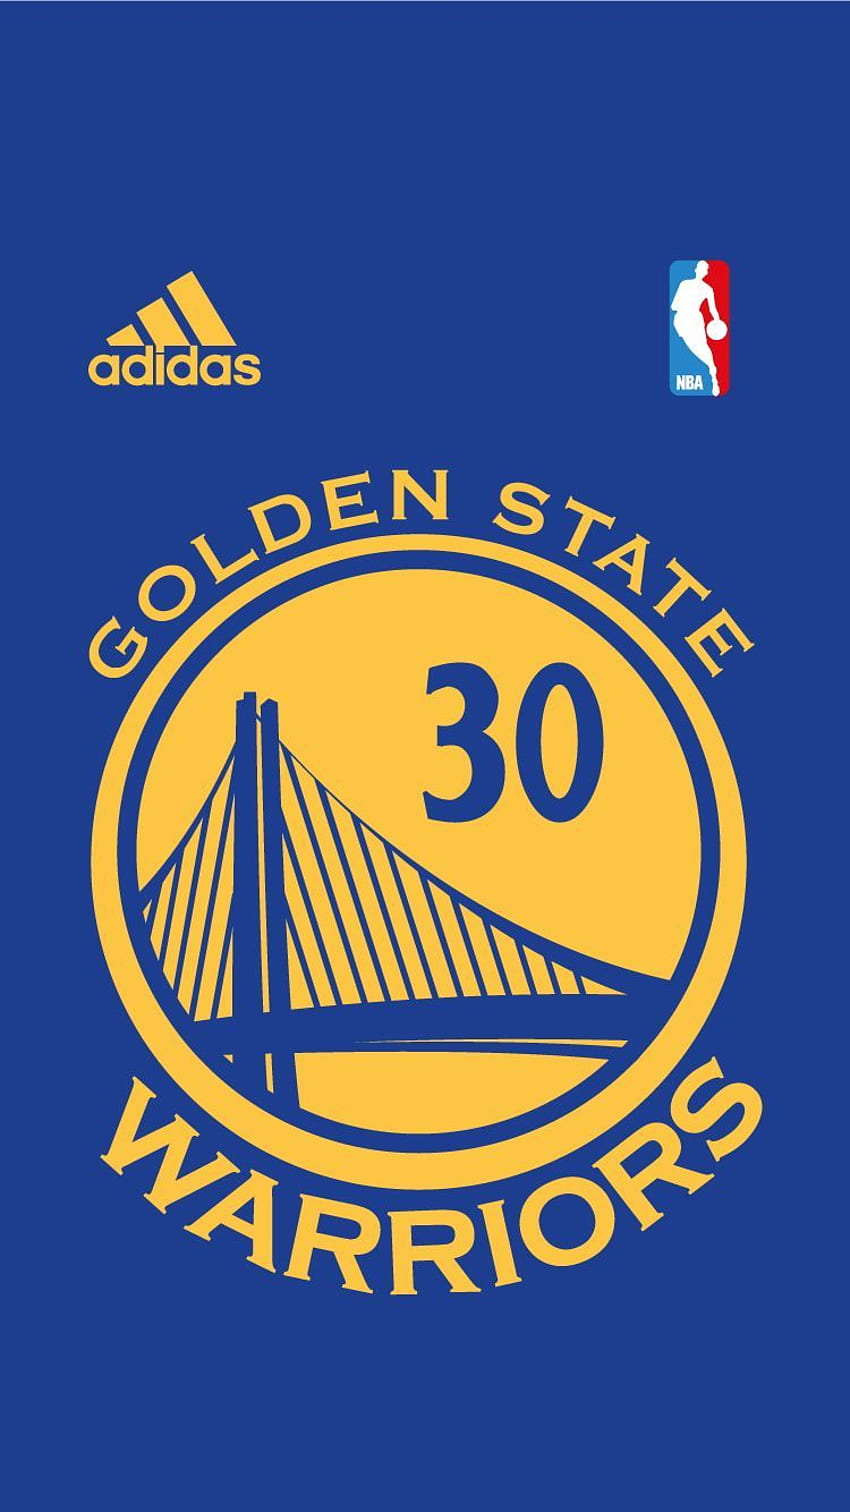 Travis stephension no NBA Jersey Project iPhone 6. Nba golden state warriors, Nba golden state, Golden state warriors, Curry Logo Papel de parede de celular HD